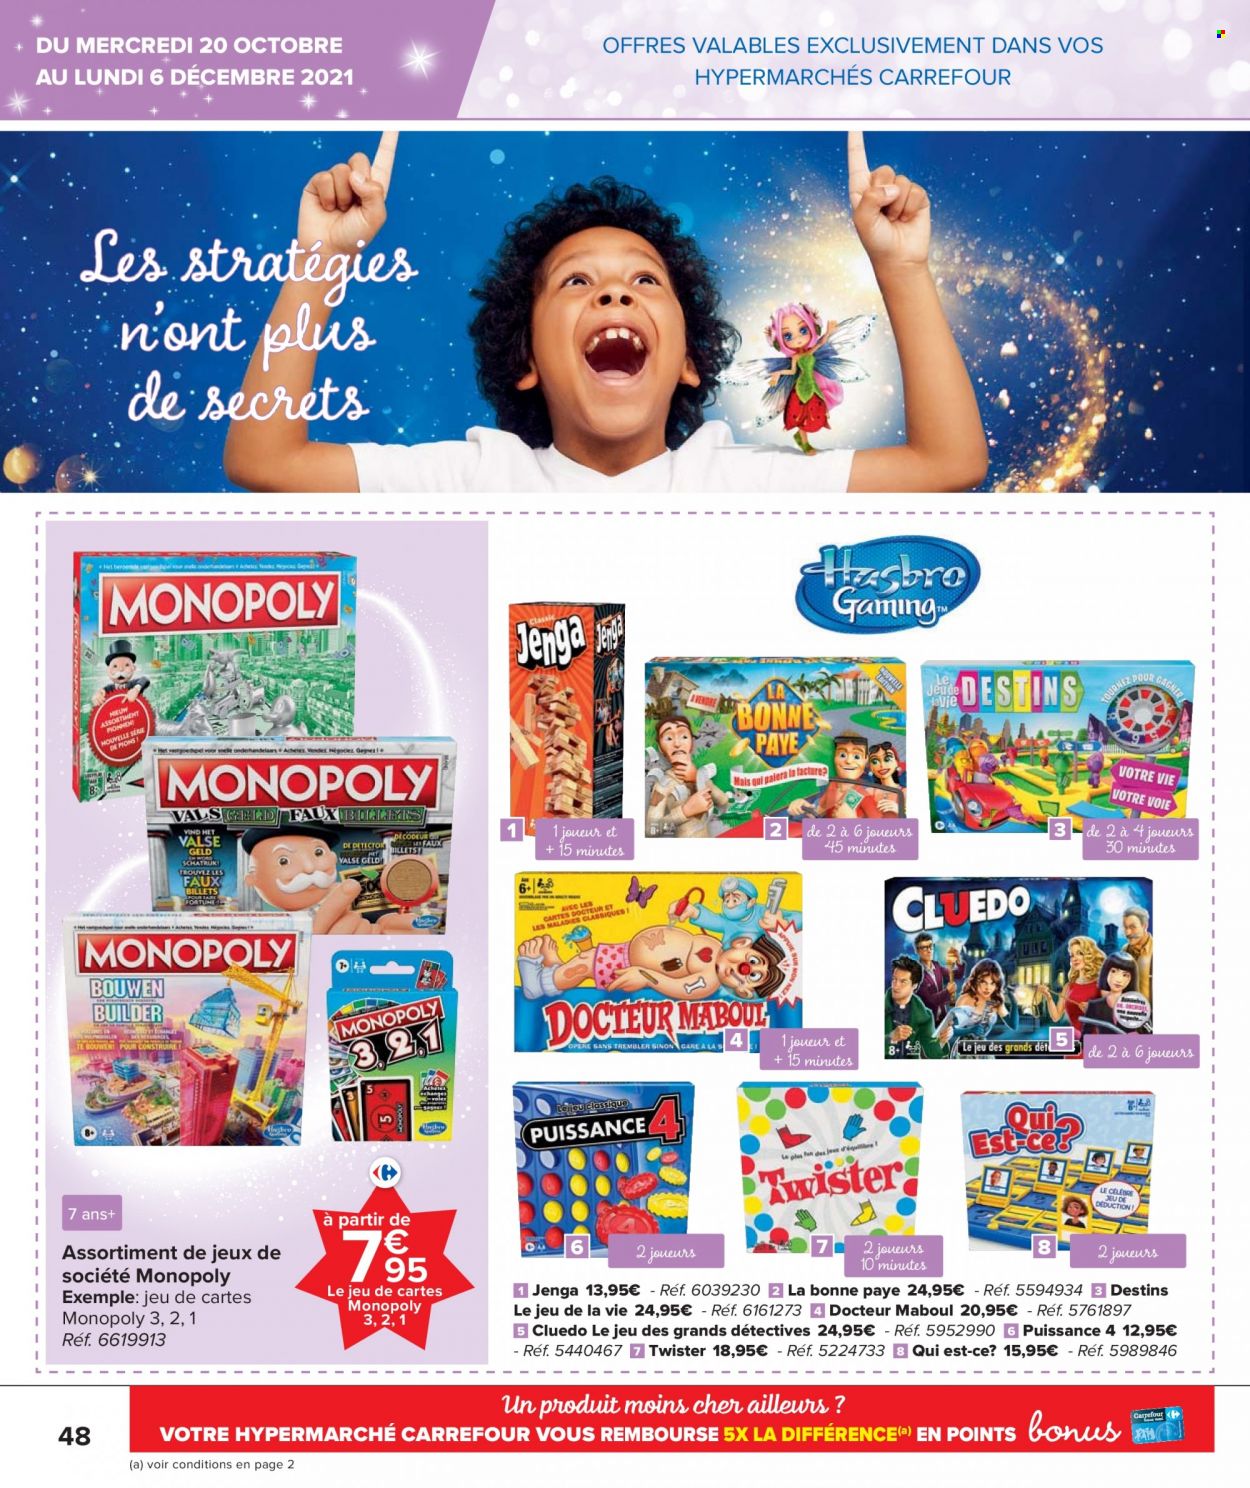 Catalogue Carrefour hypermarkt - 20.10.2021 - 6.12.2021. Page 48.